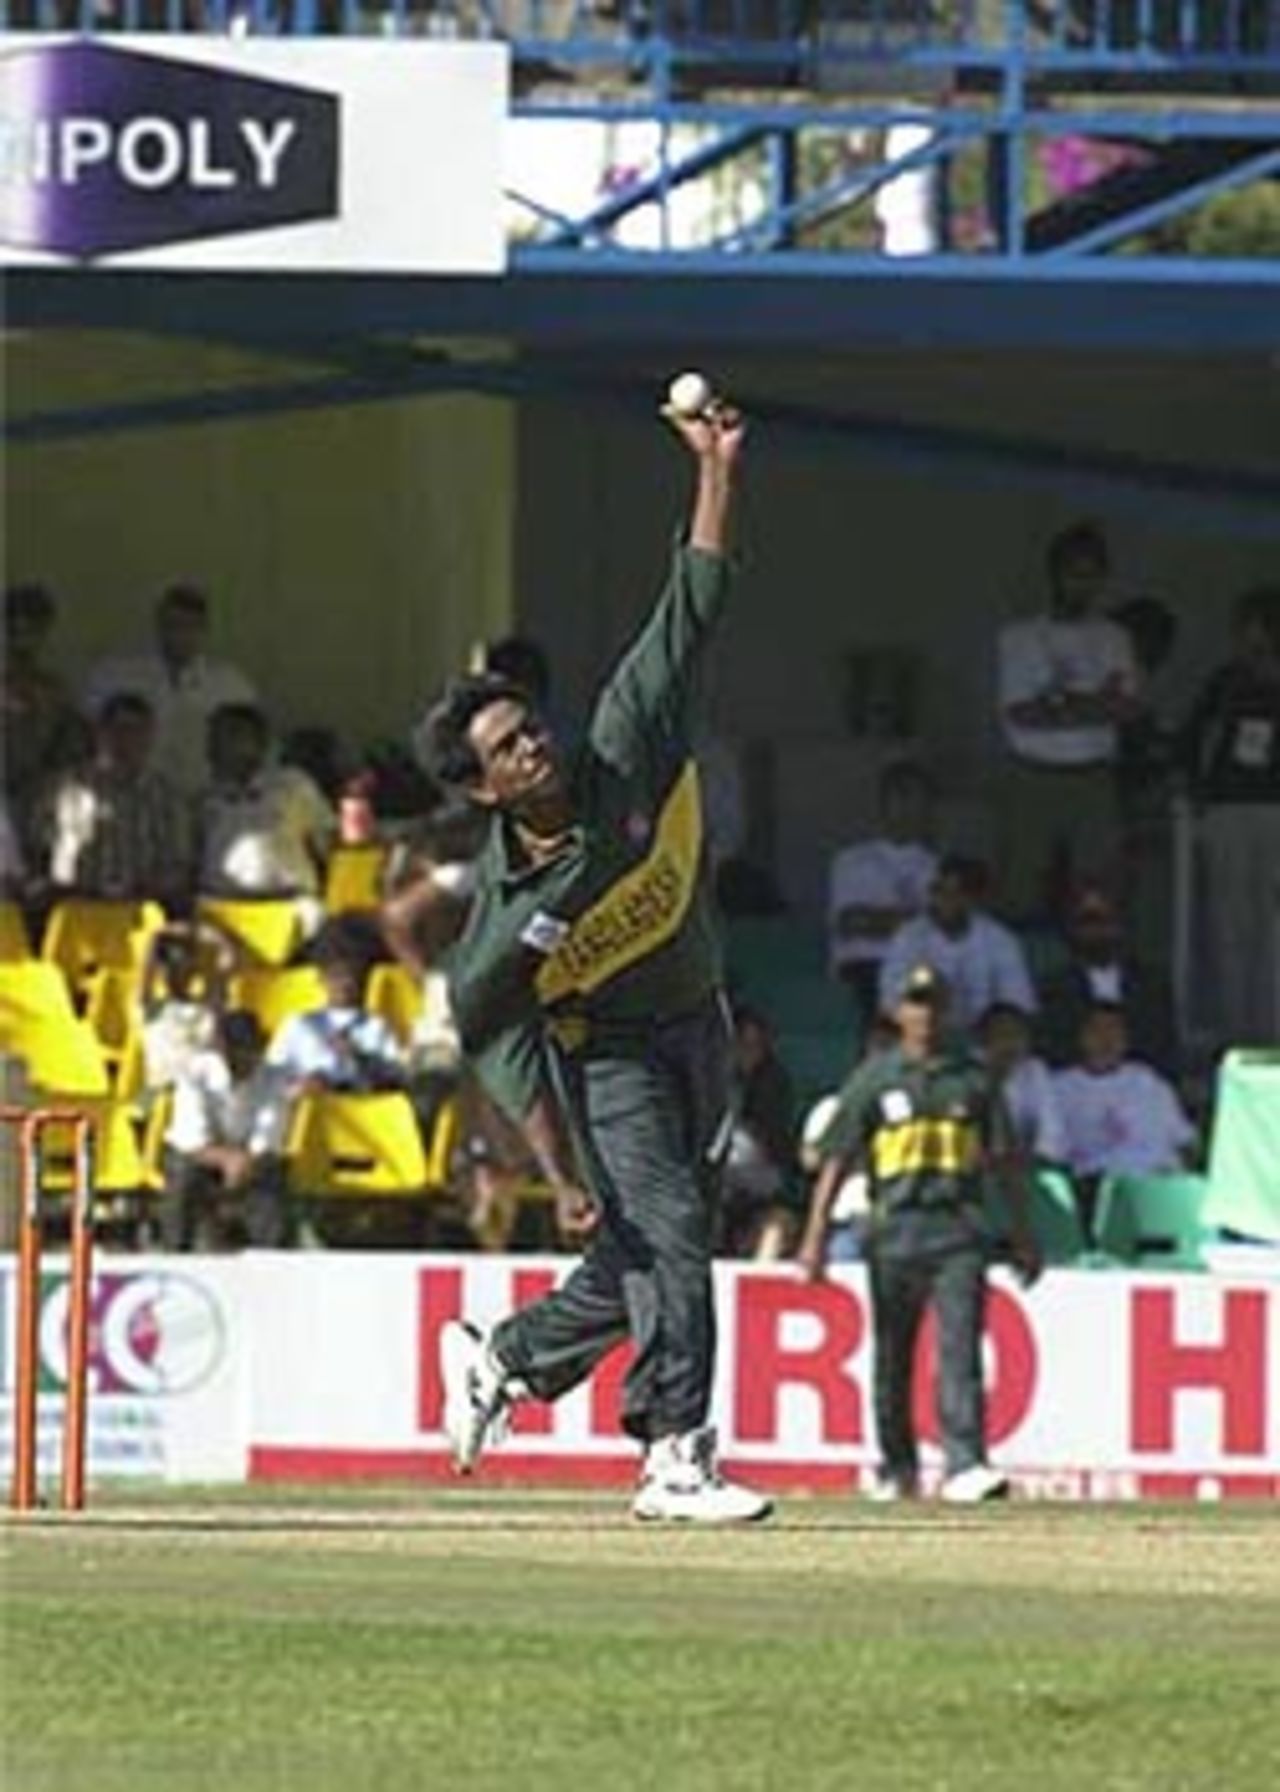 Rafique in action against England in the ICC KnockOut tournament, ICC KnockOut, 2000/01, 3rd Preliminary Quarter Final, Bangladesh v England, Gymkhana Club Ground, Nairobi, 05 October 2000.